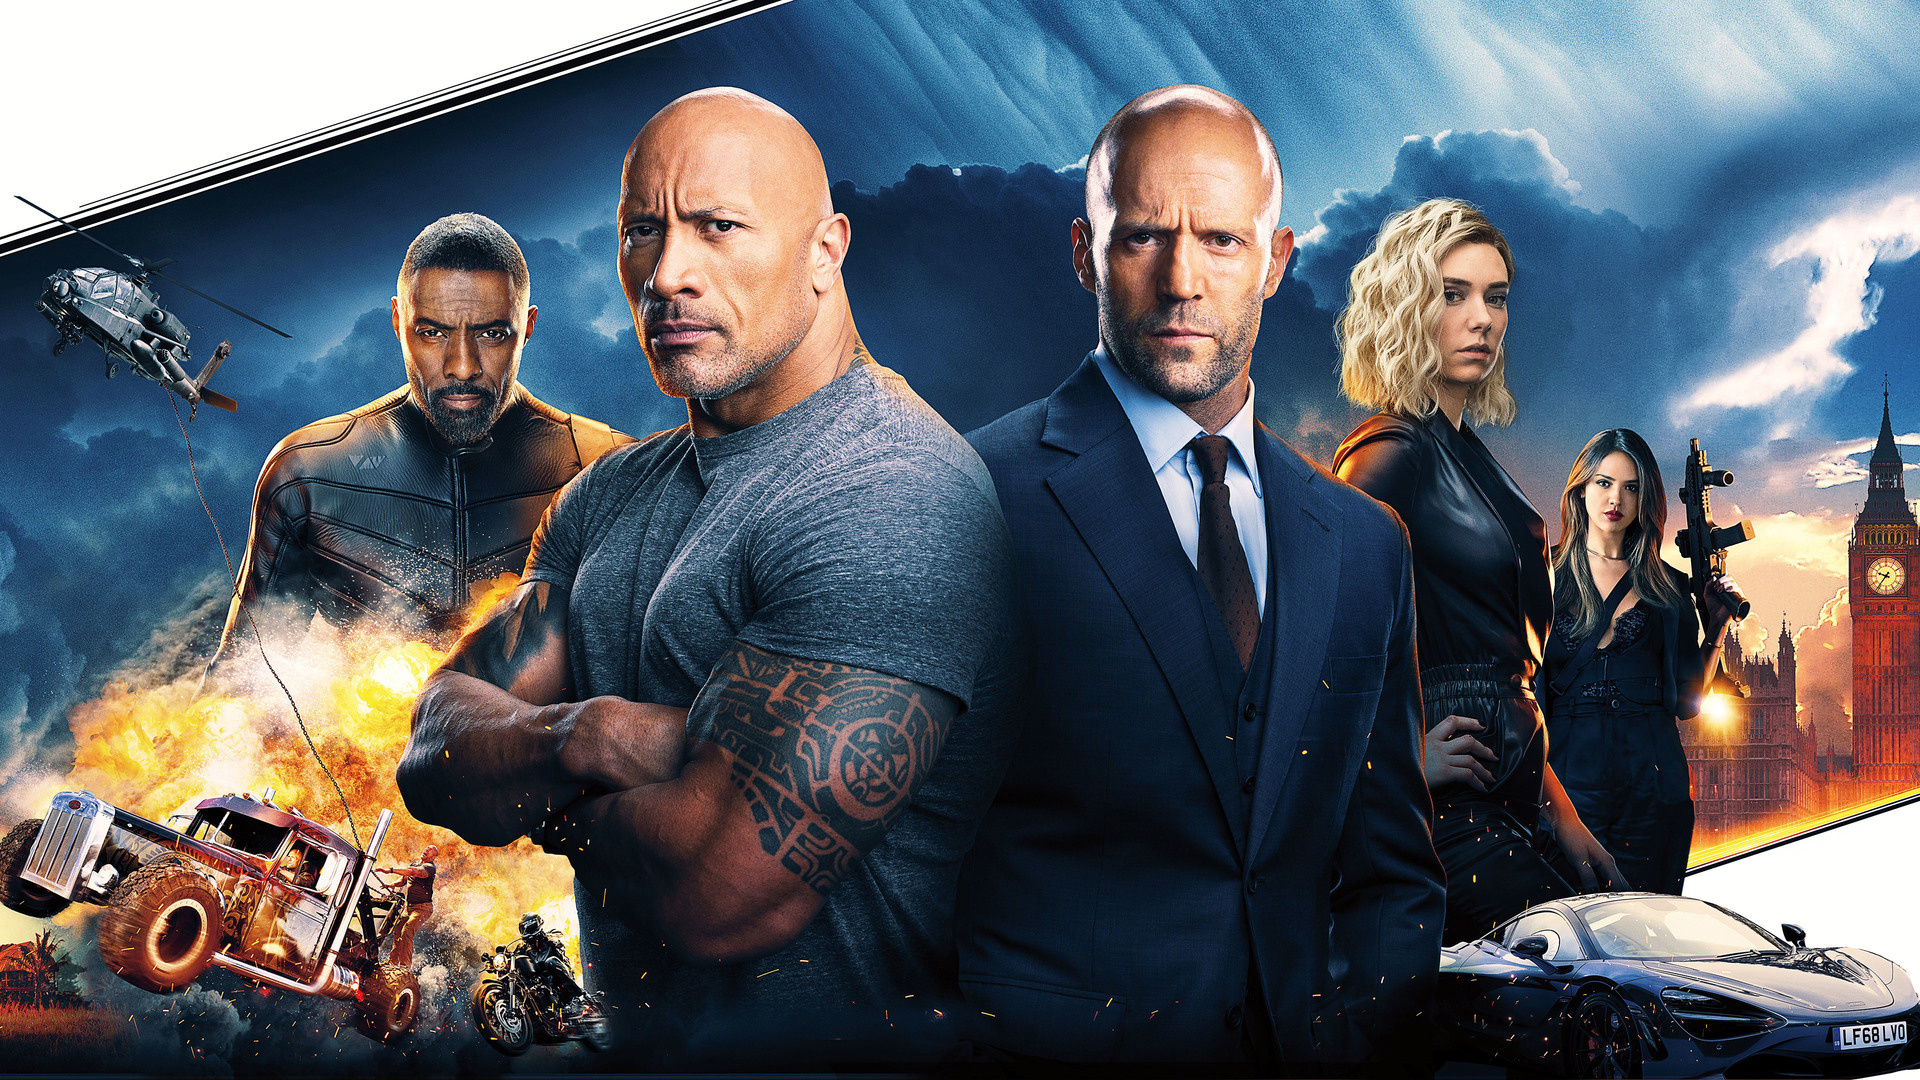 hobbs and shaw cast characters uhdpaper.com hd 19